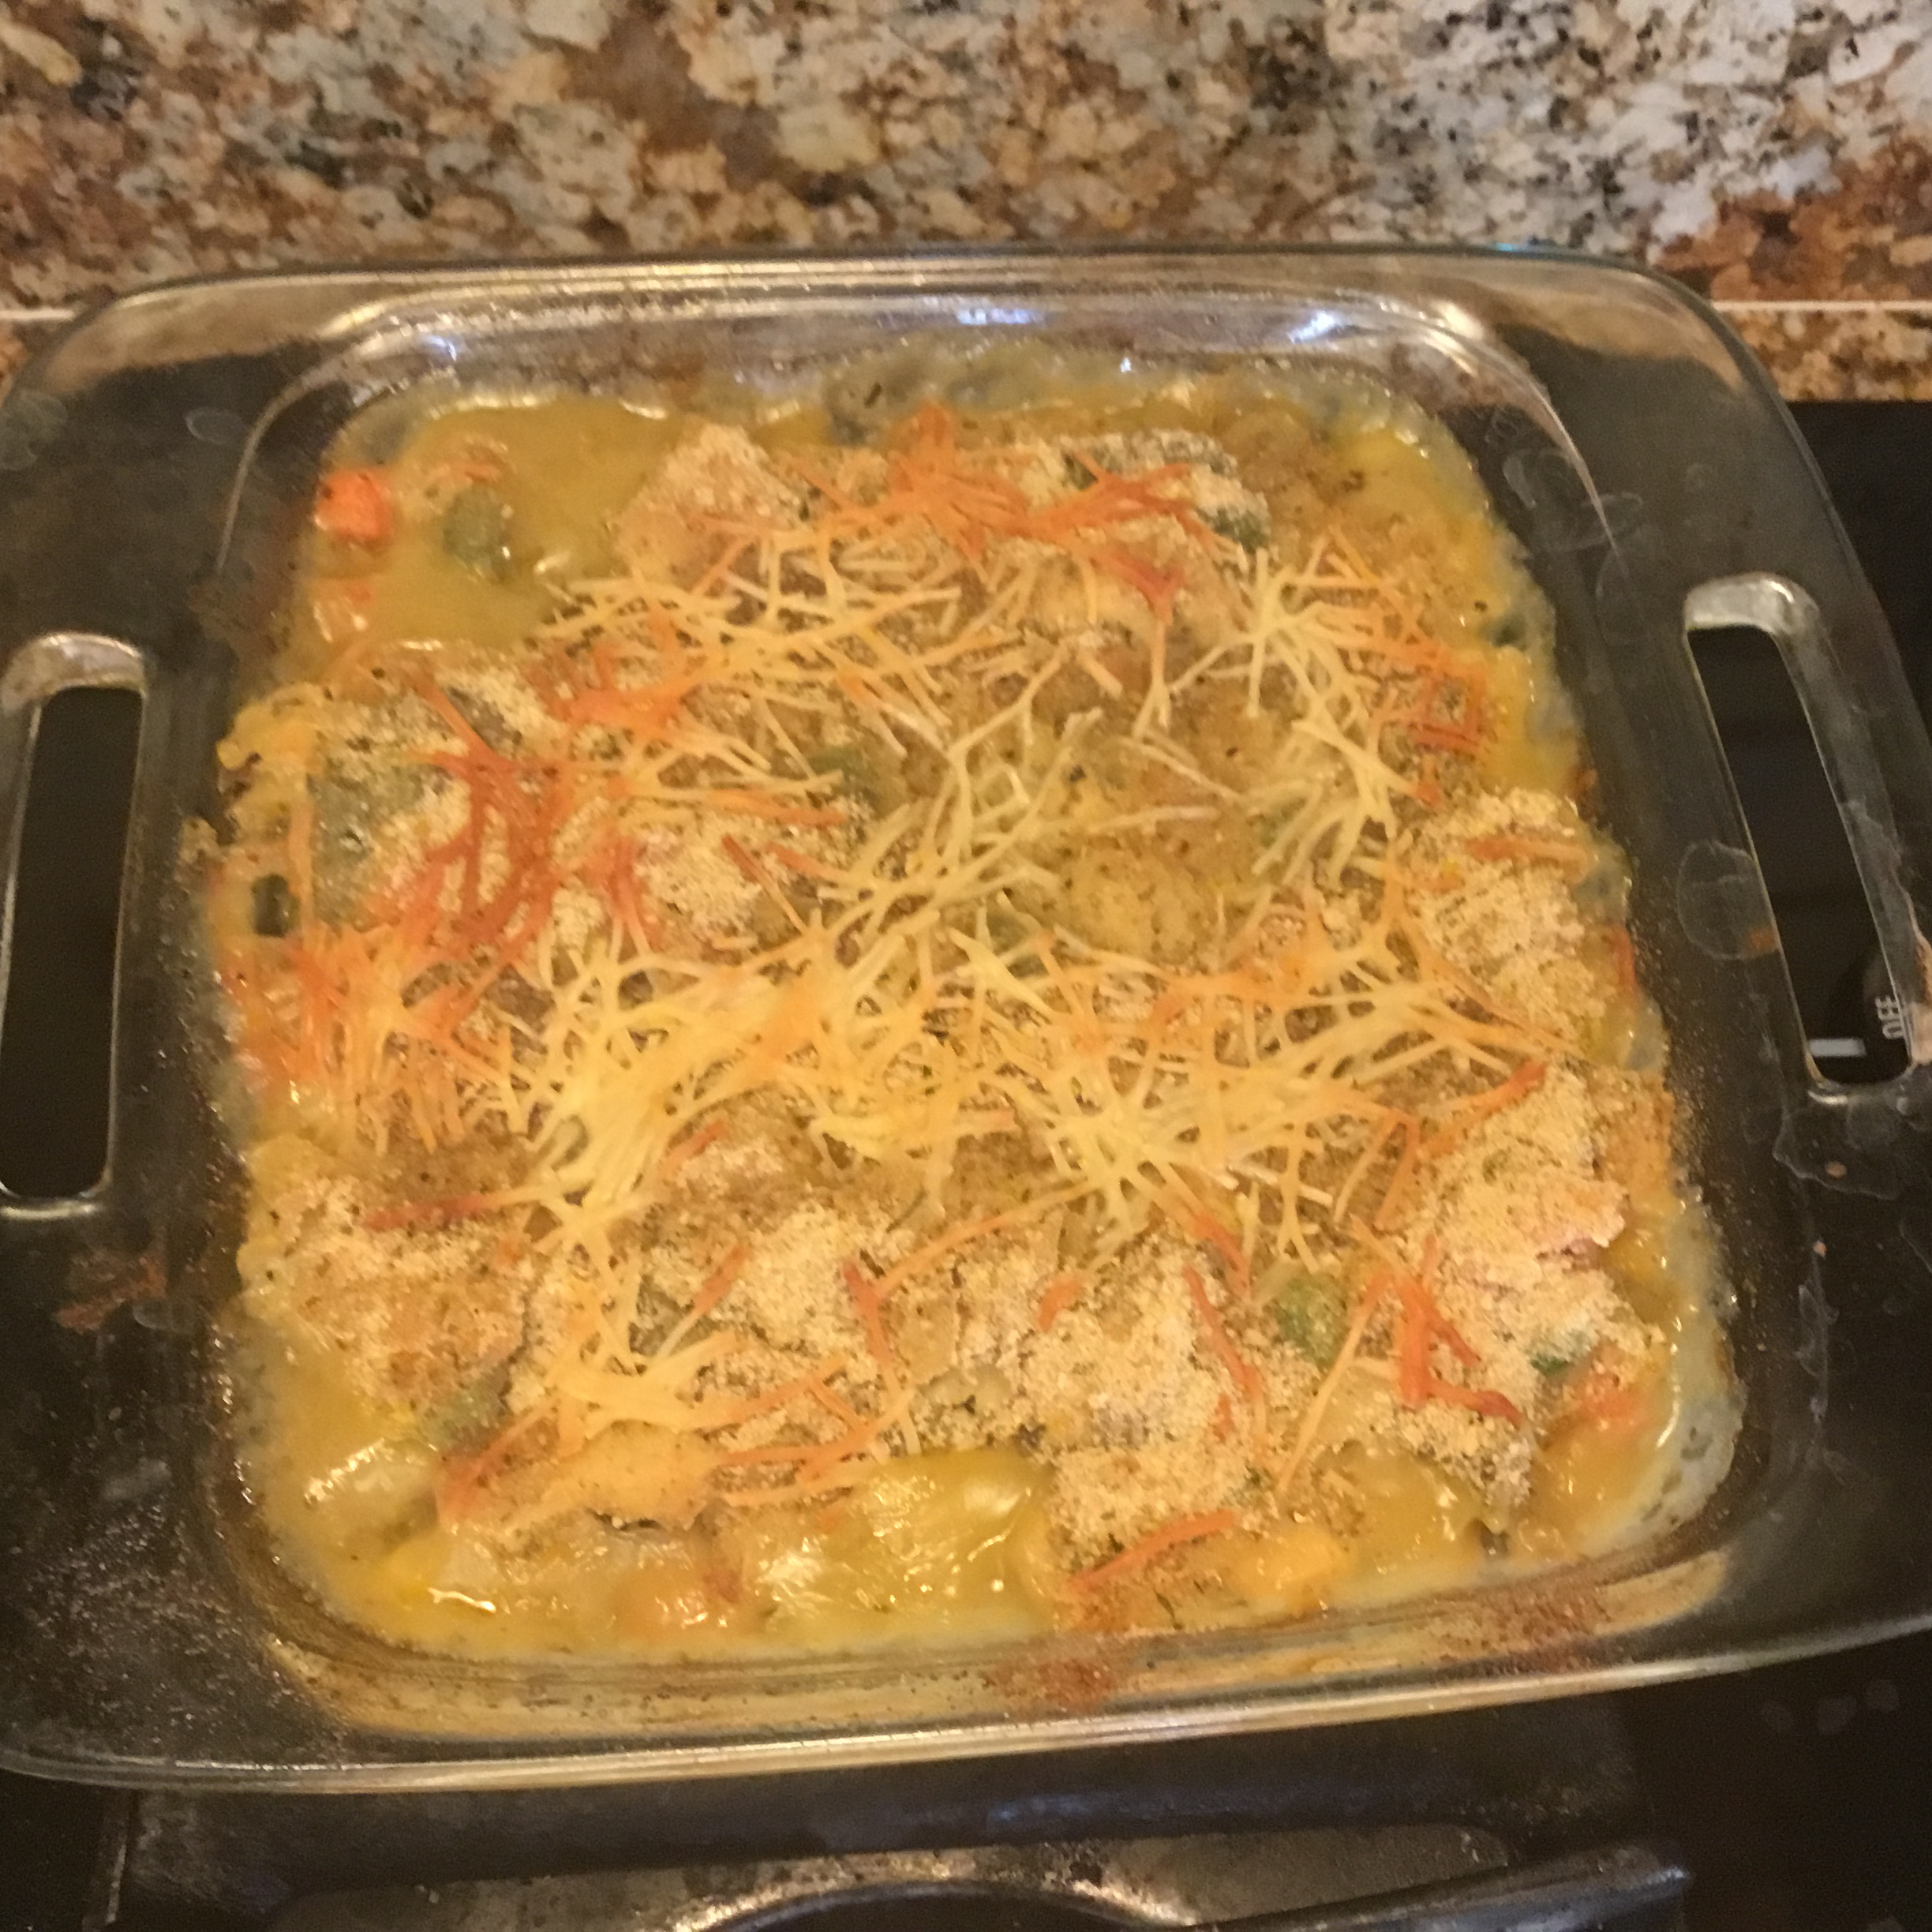 Chicken and Pasta Casserole with Mixed Vegetables 